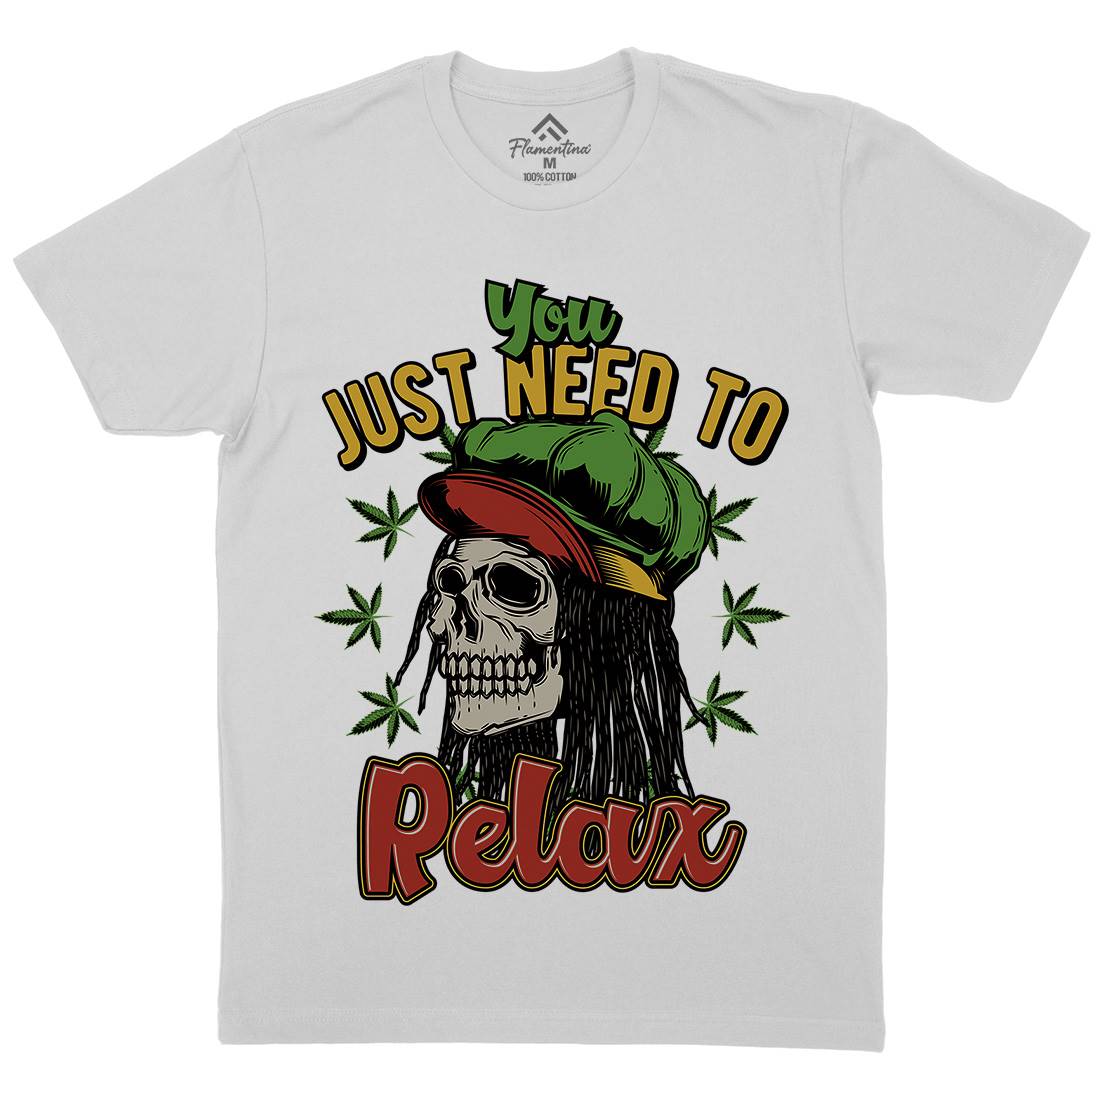 Need To Relax Mens Crew Neck T-Shirt Drugs B804